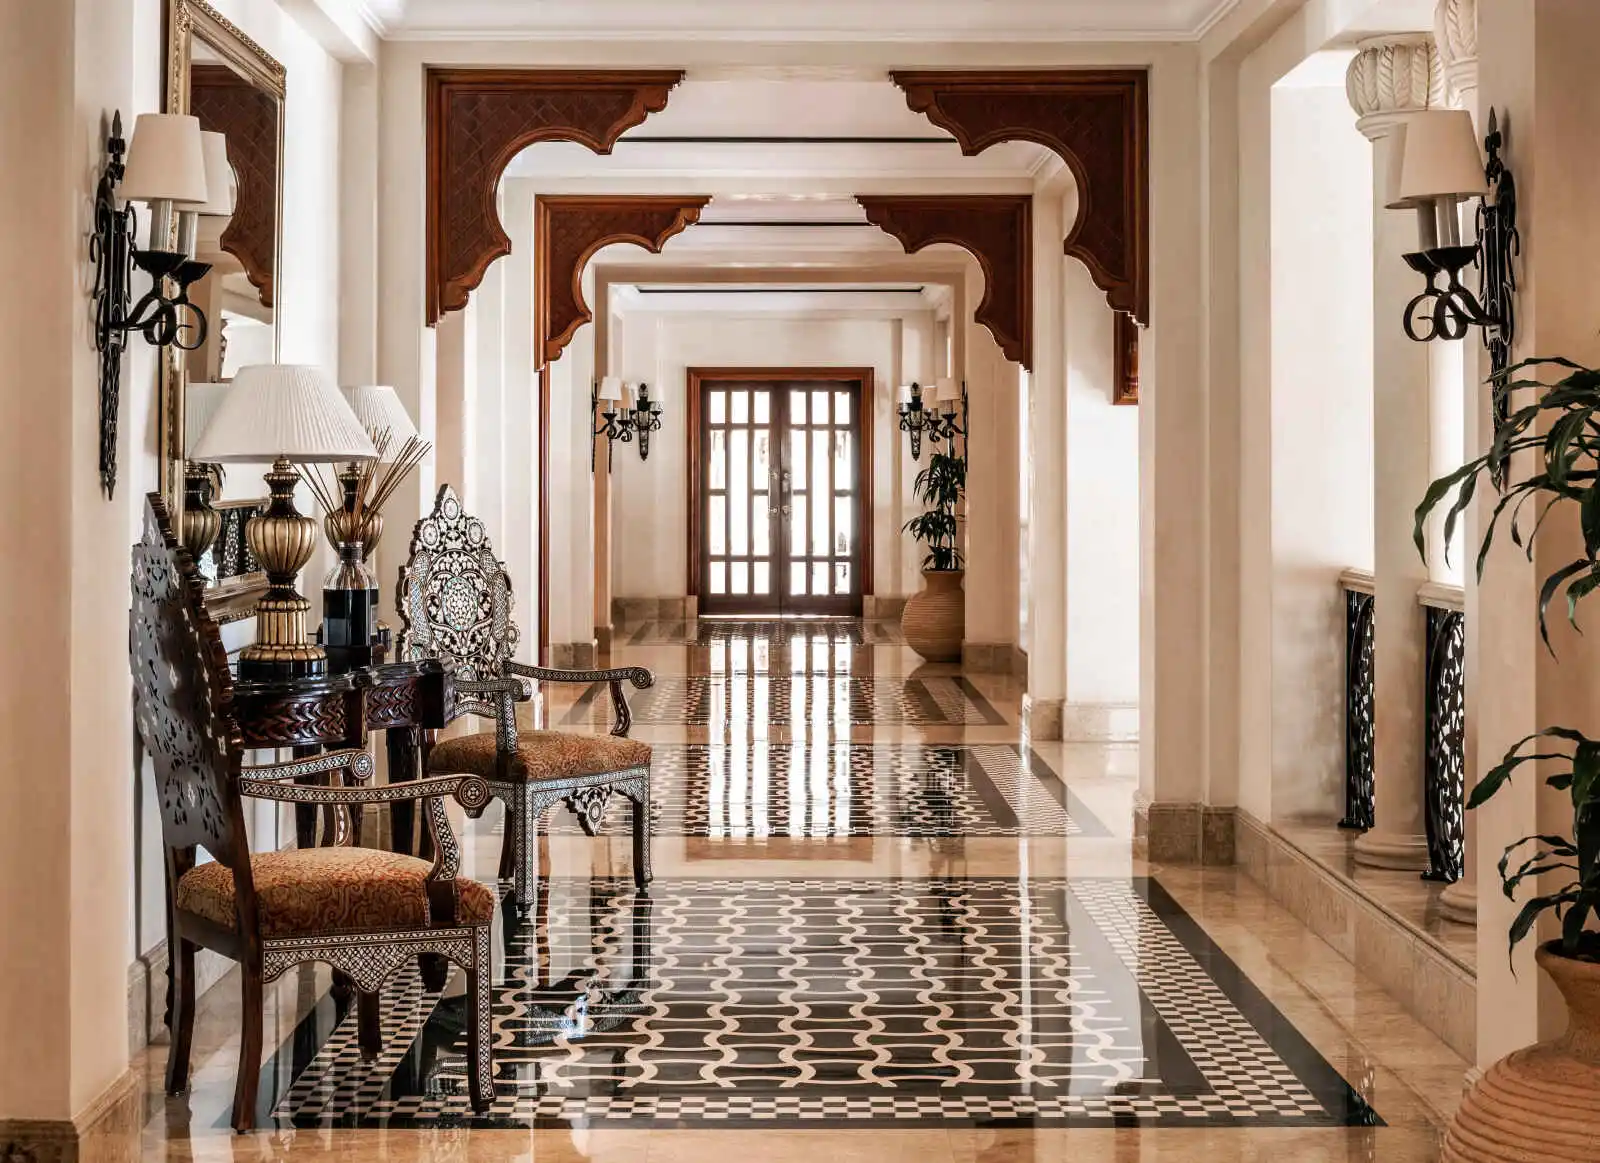 Lobby, The Residence, One&Only Royal Mirage, Dubaï, Émirats arabes unis